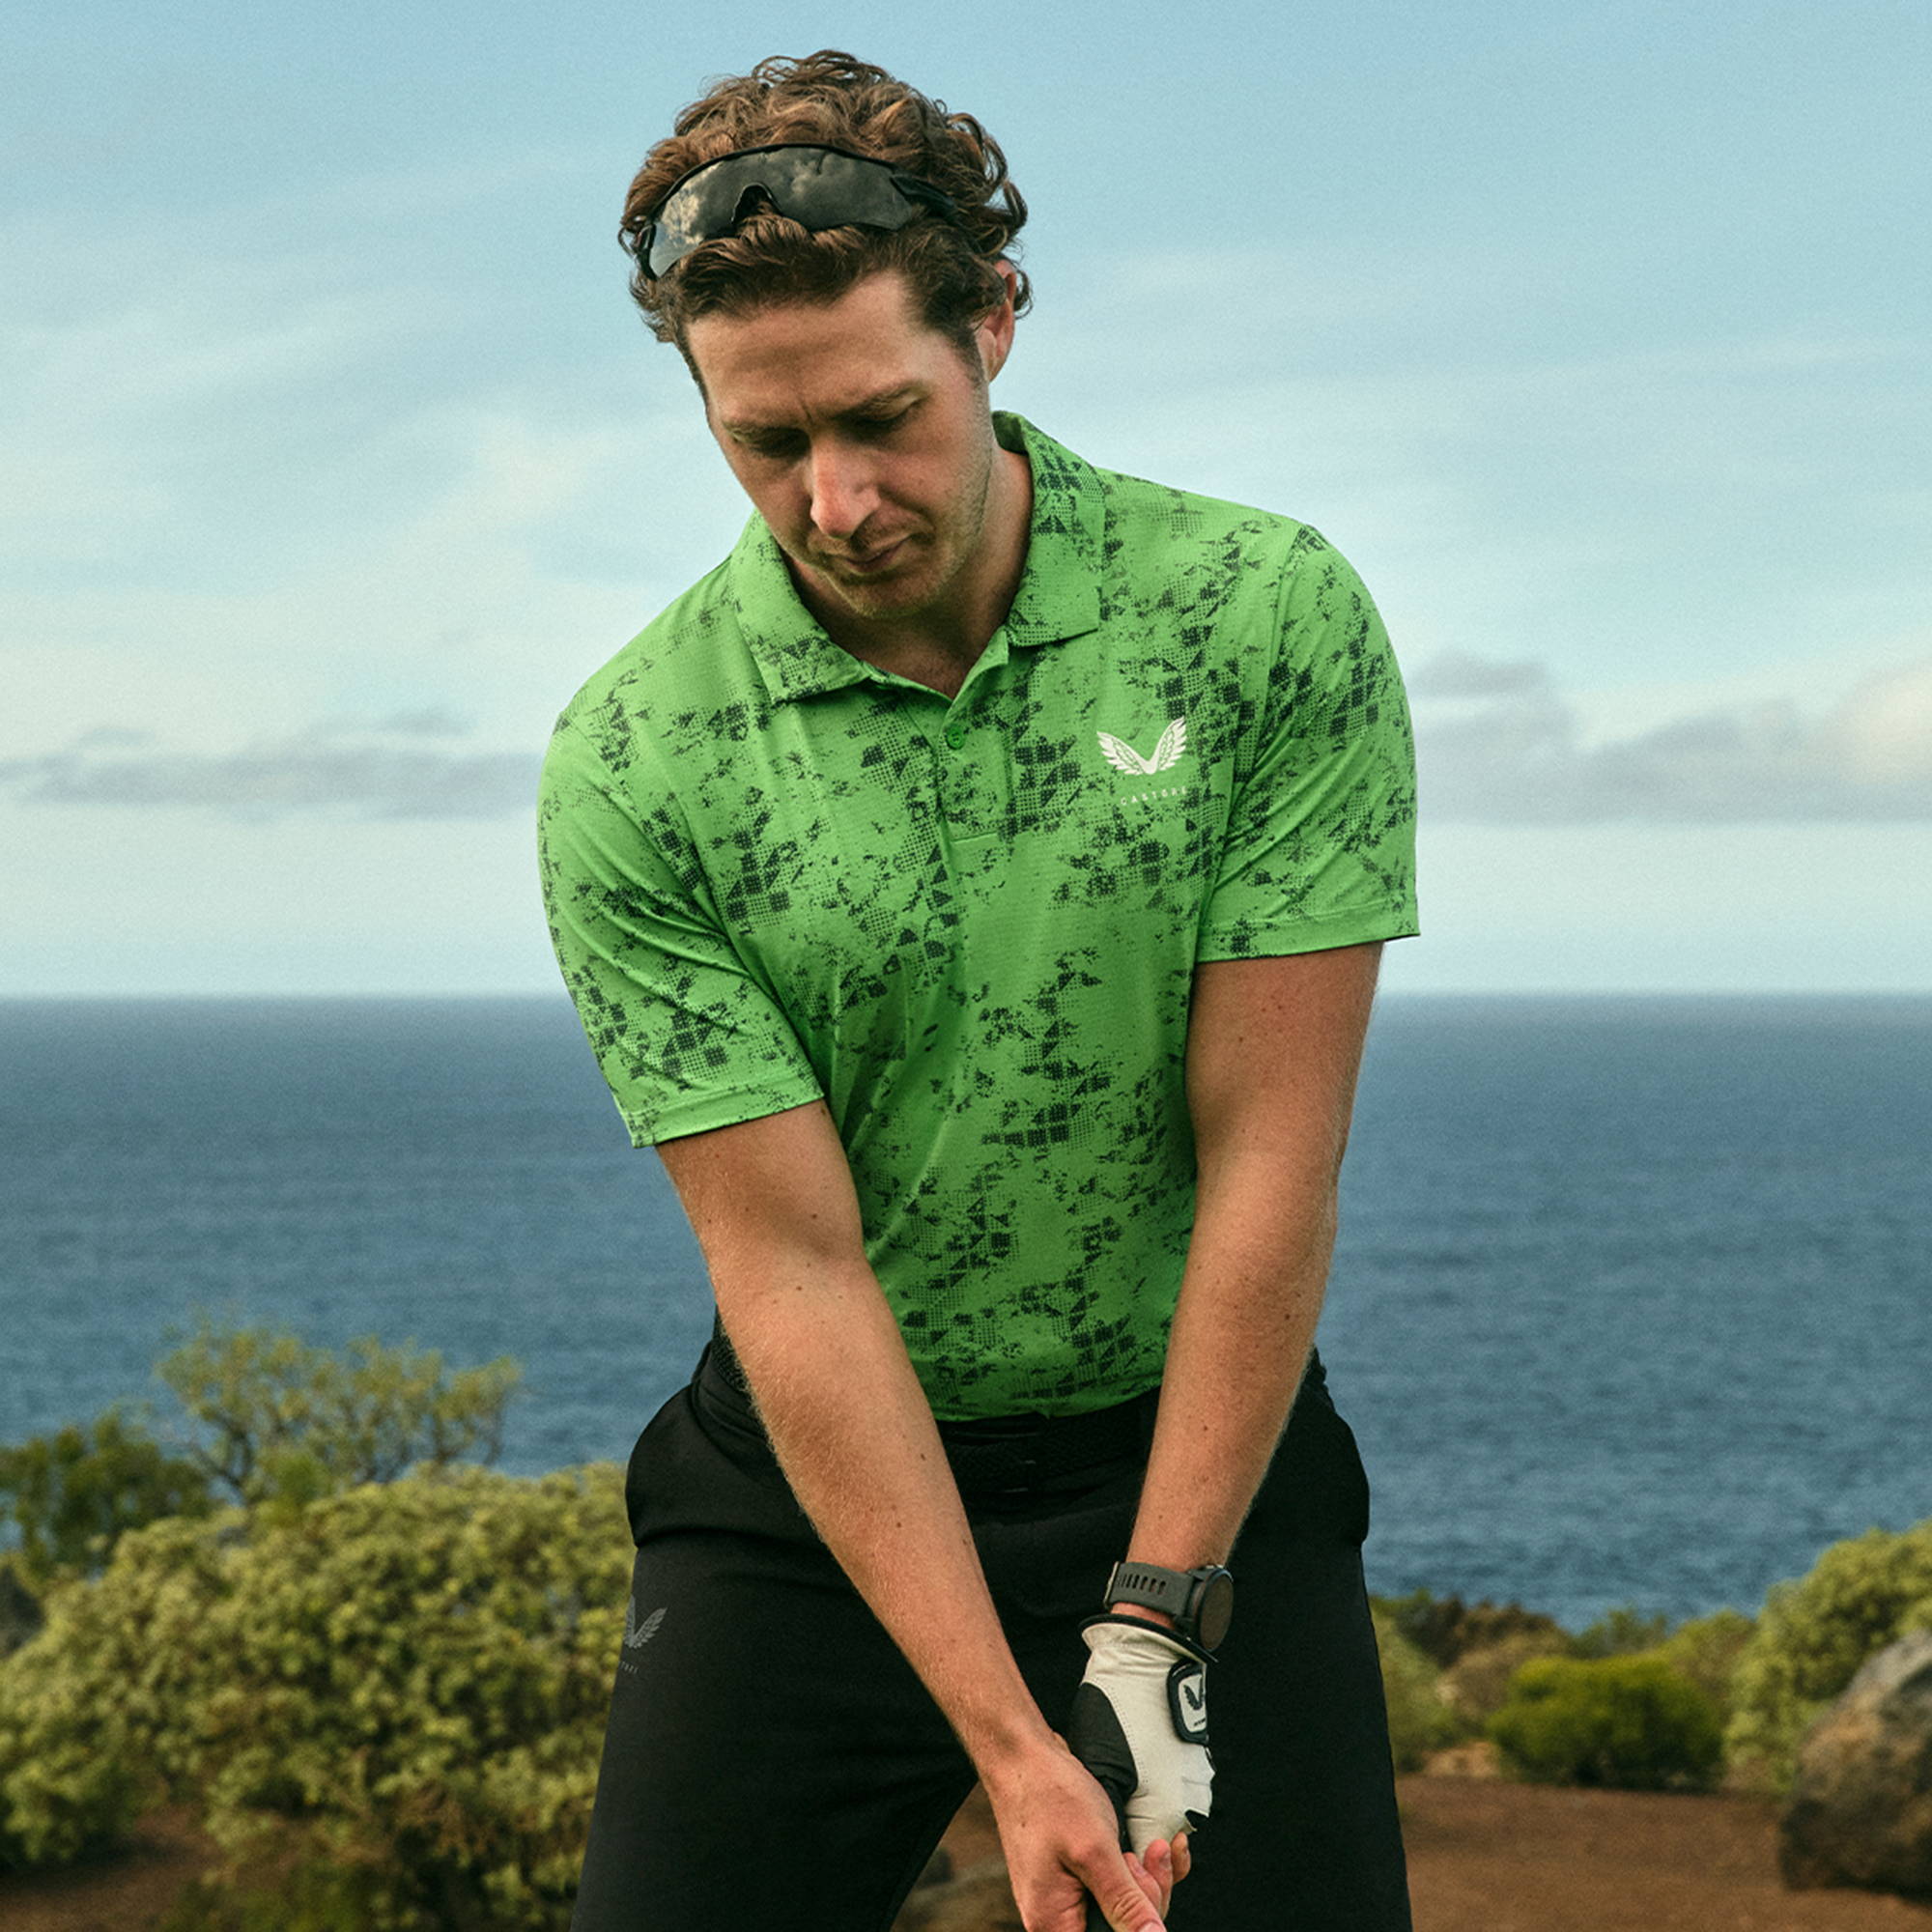 Mens Golf Clothing Store, Shirts, Trousers & Golf Shoes